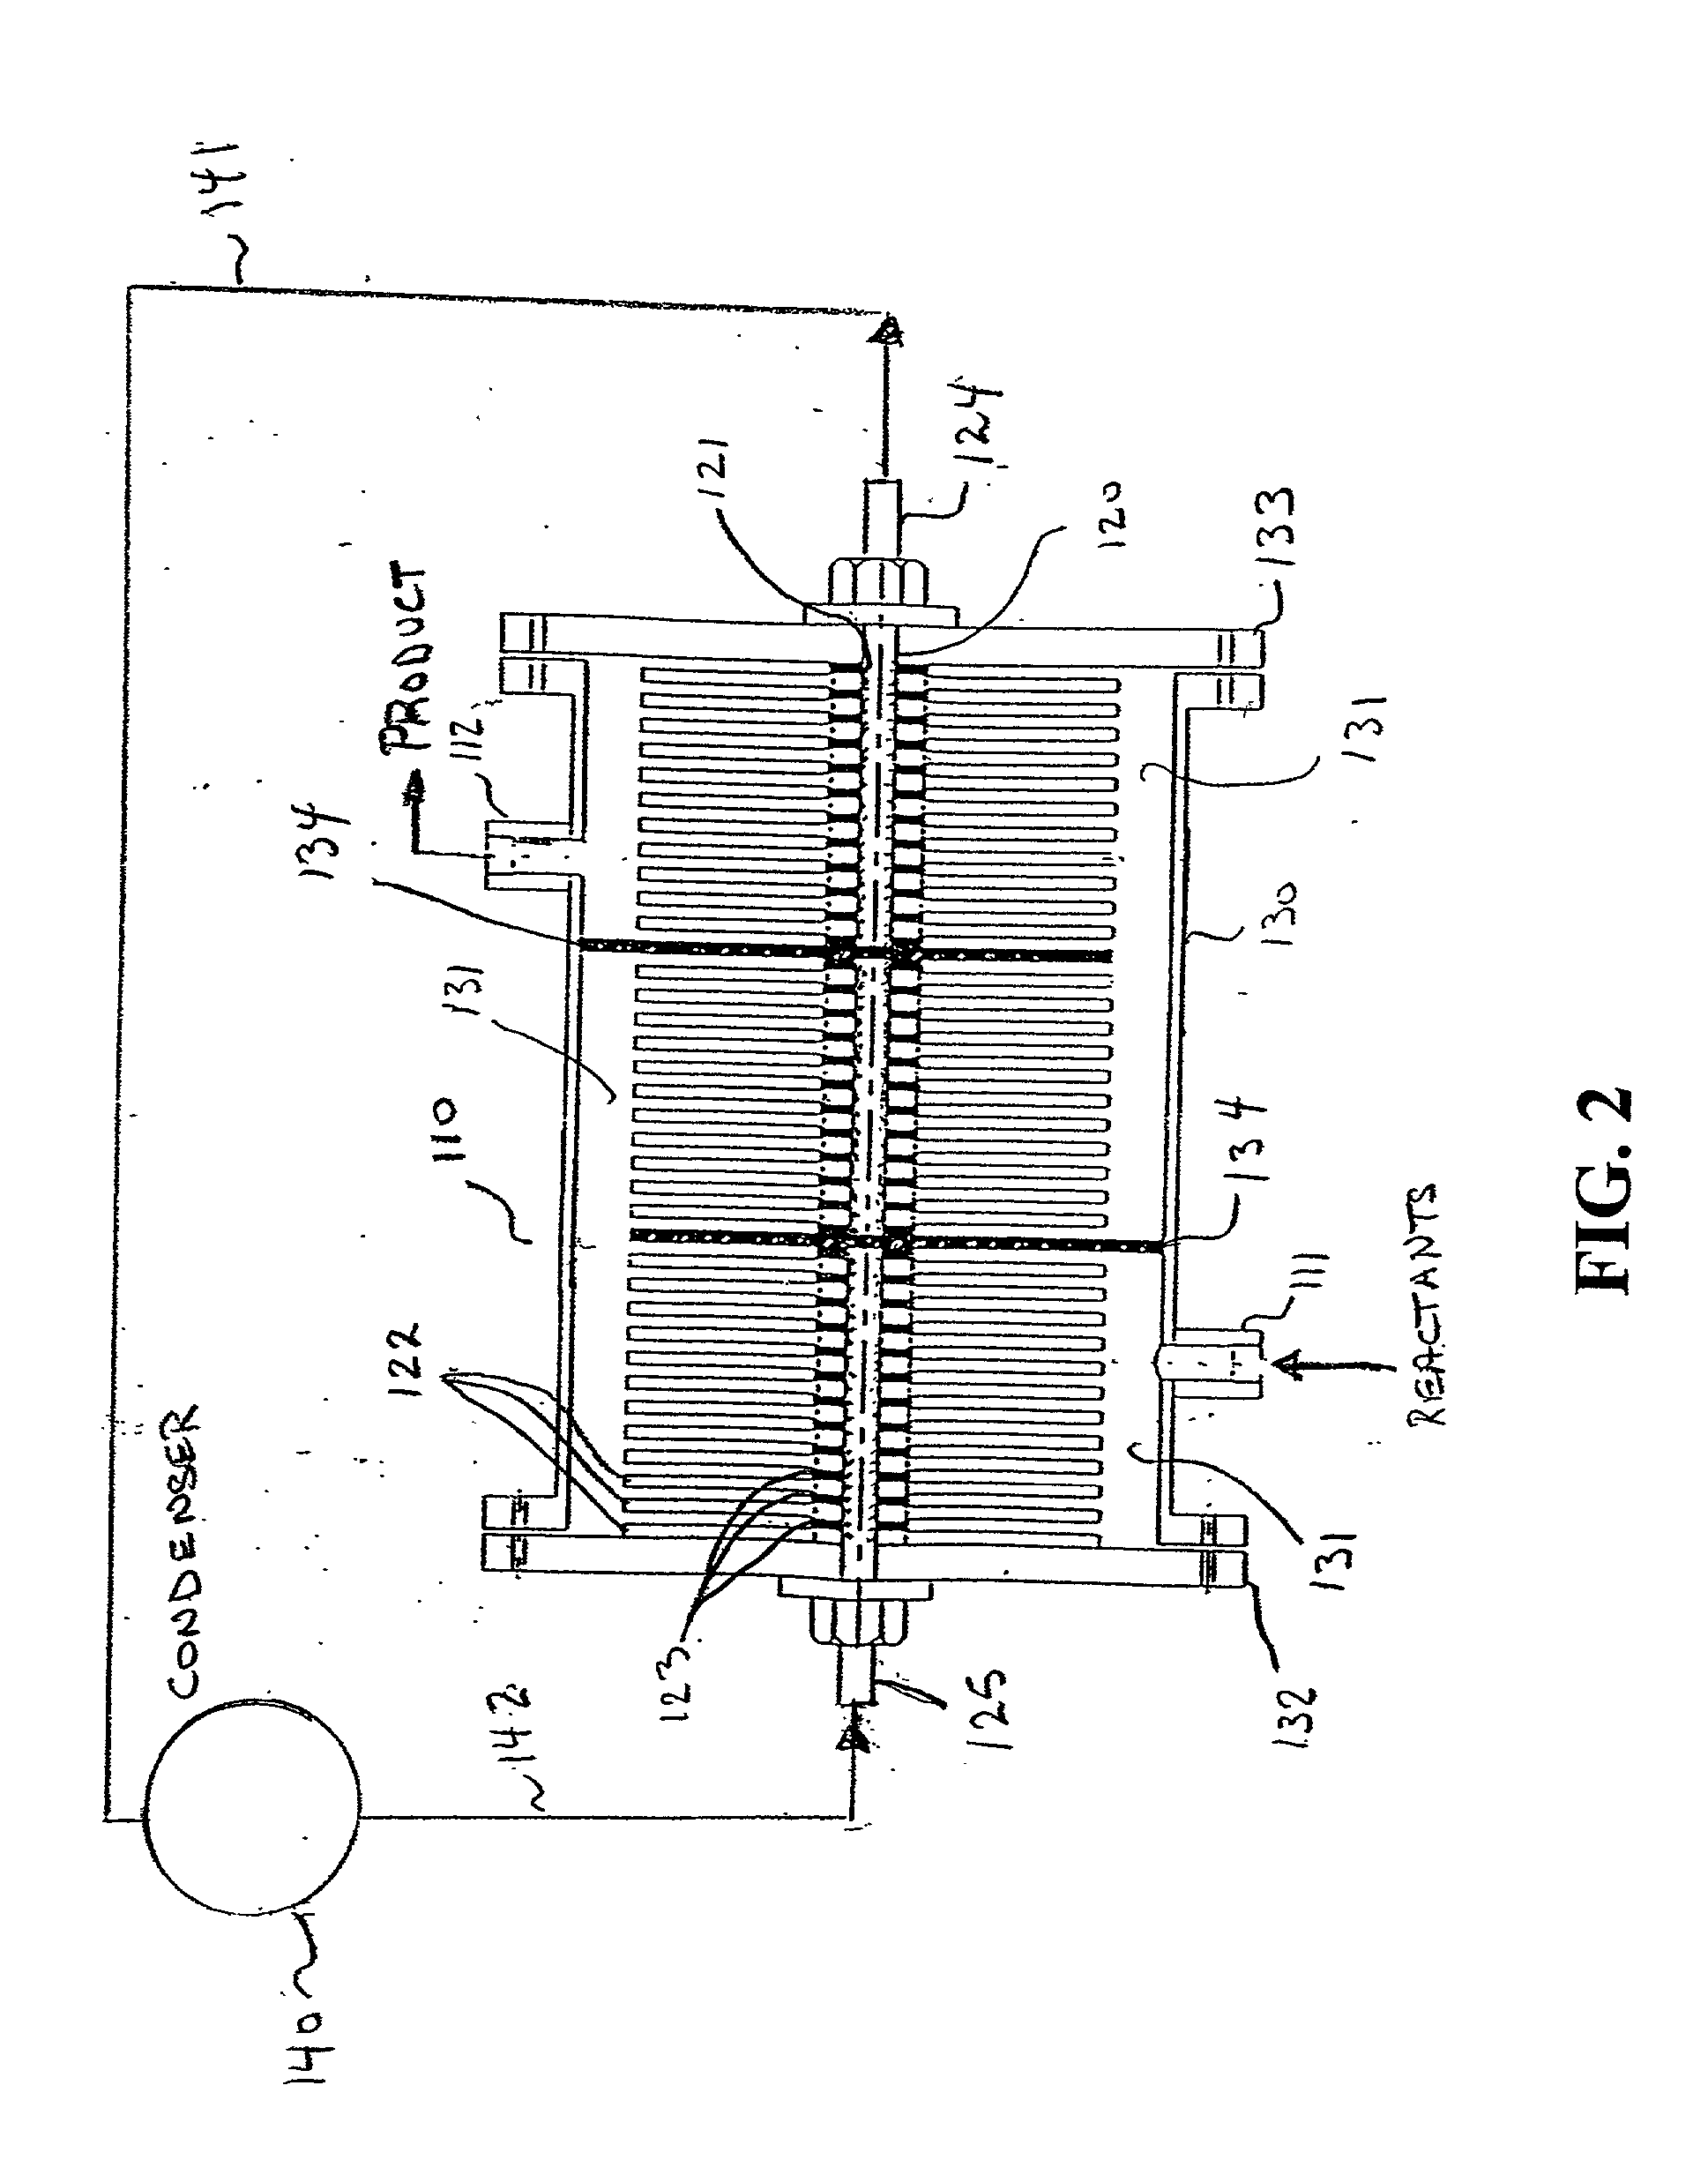 Stratified flow chemical reactor